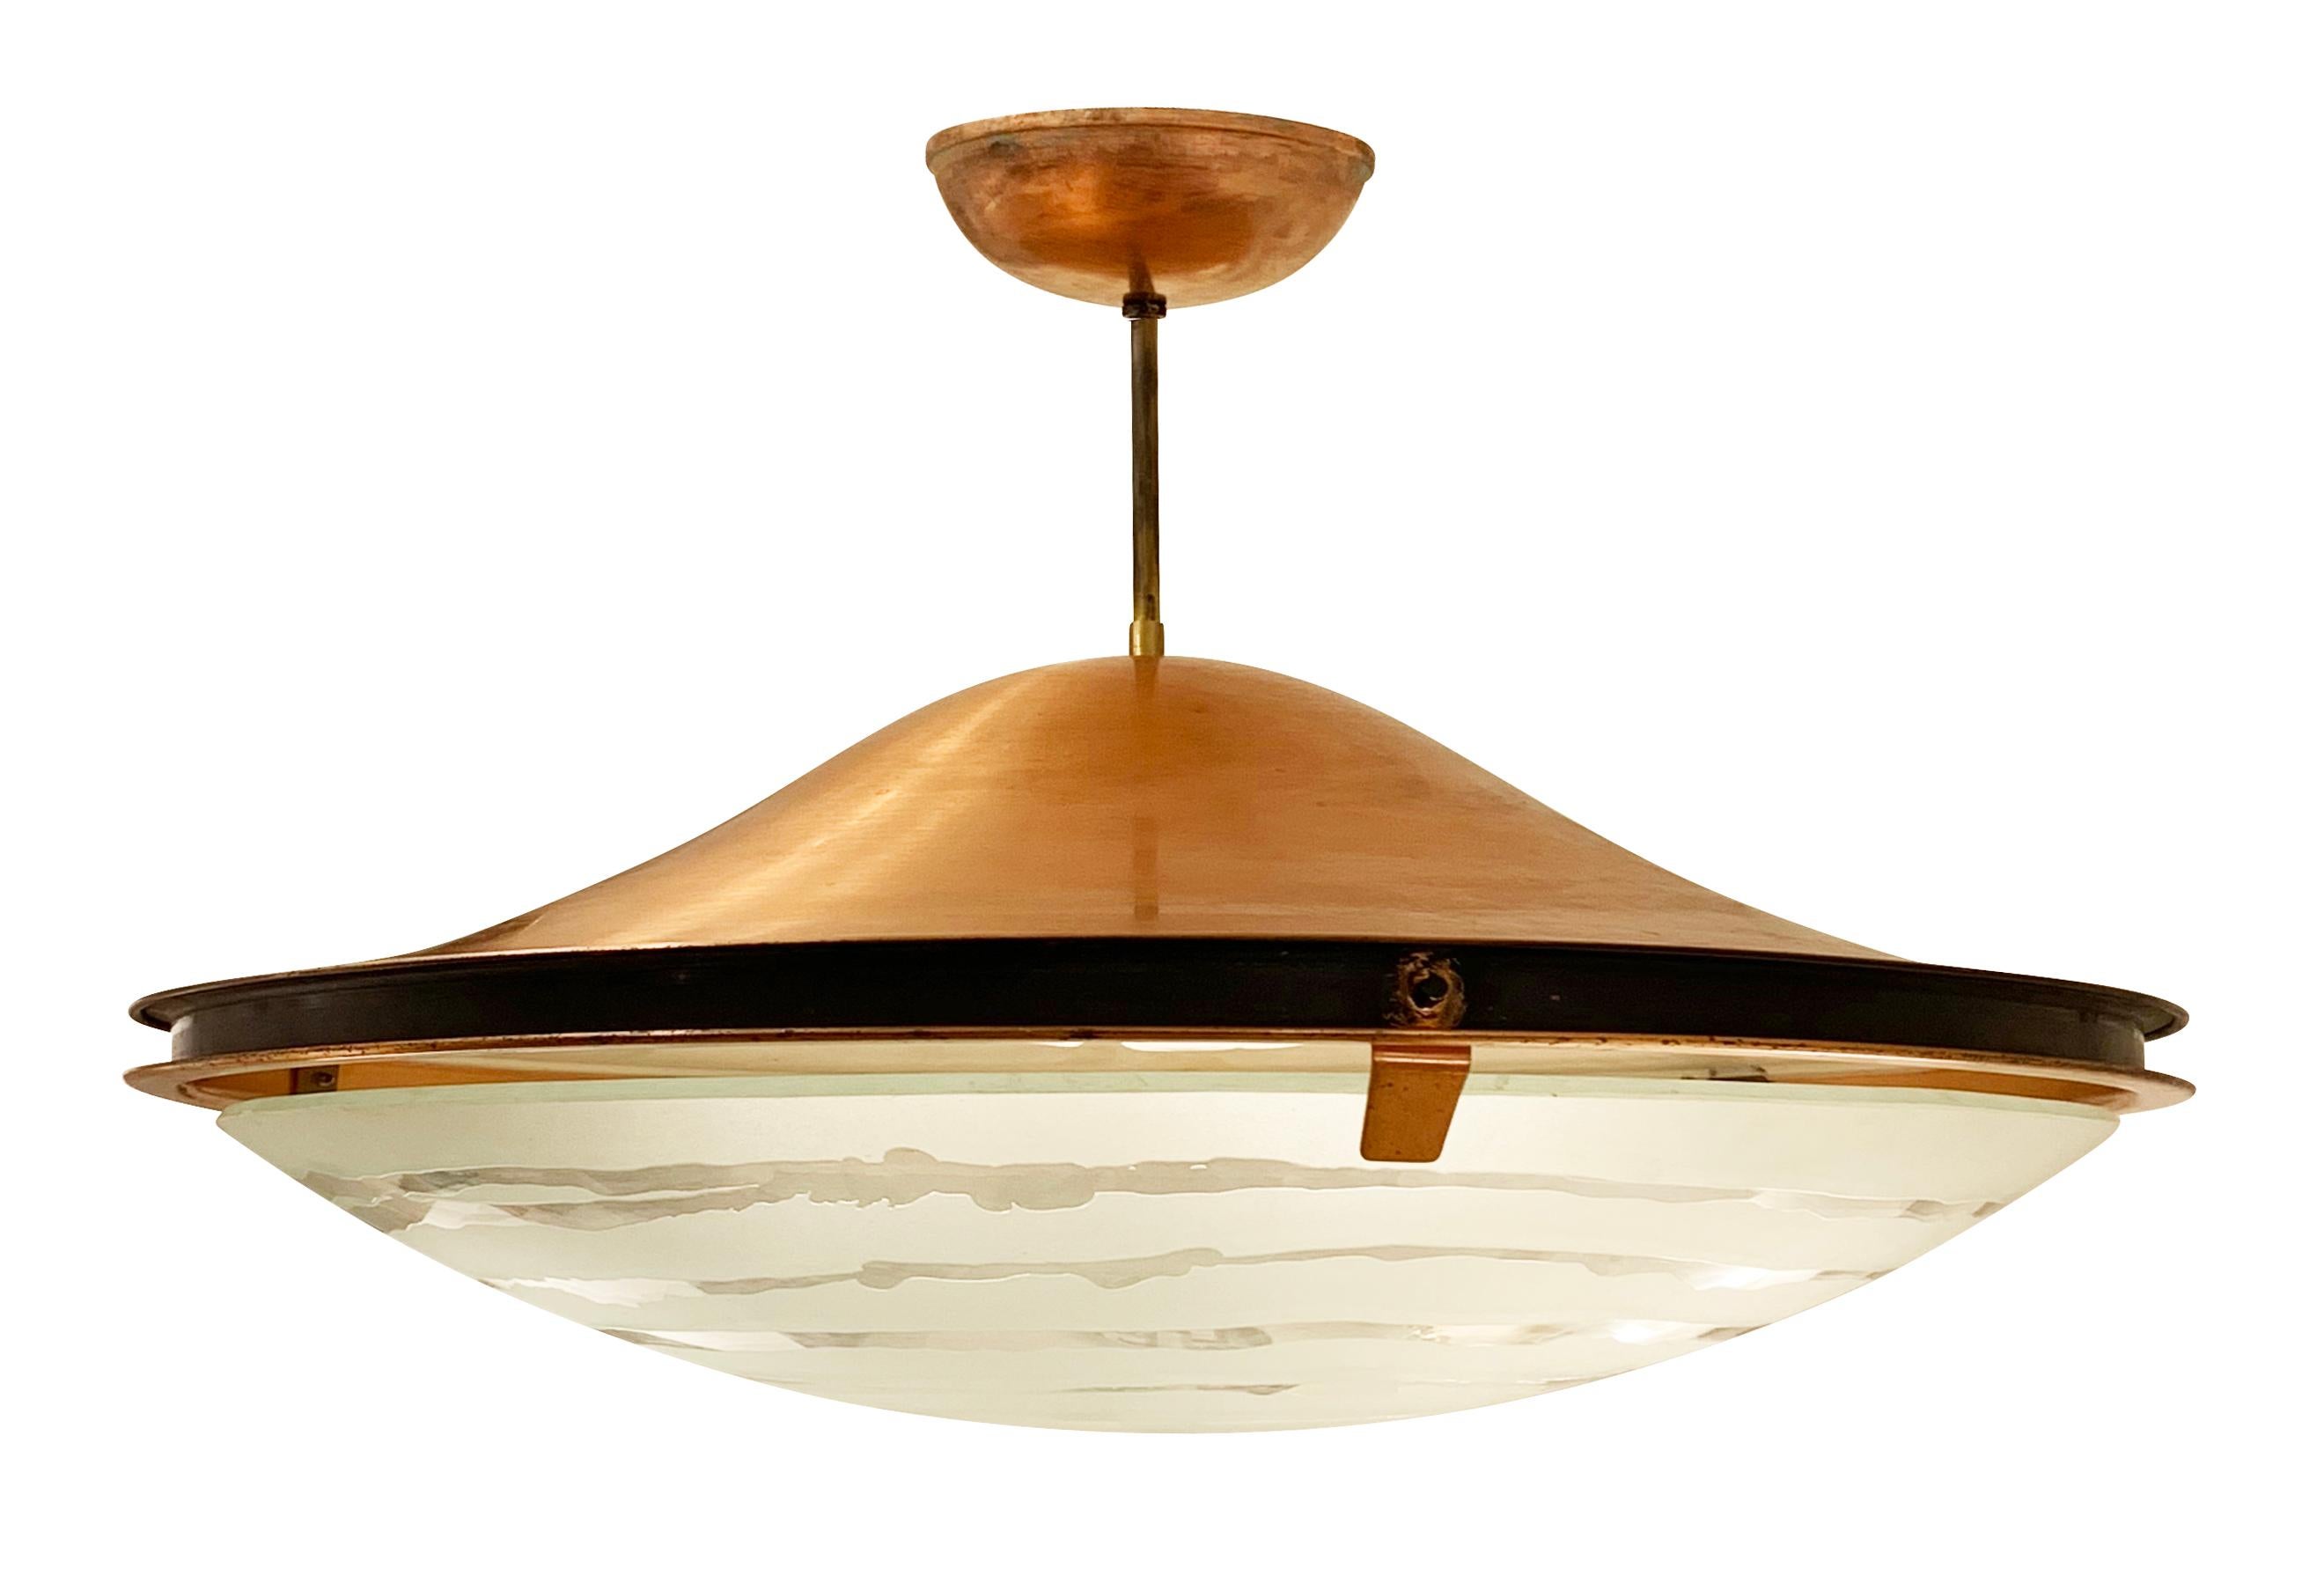 Stilnovo chandelier from the 1960s with a unique etched glass diffuser and copper framing.

Condition: Excellent vintage condition, minor wear consistent with age and use.

Diameter: 26”

Height: 15”

Ref#: LTZ2008